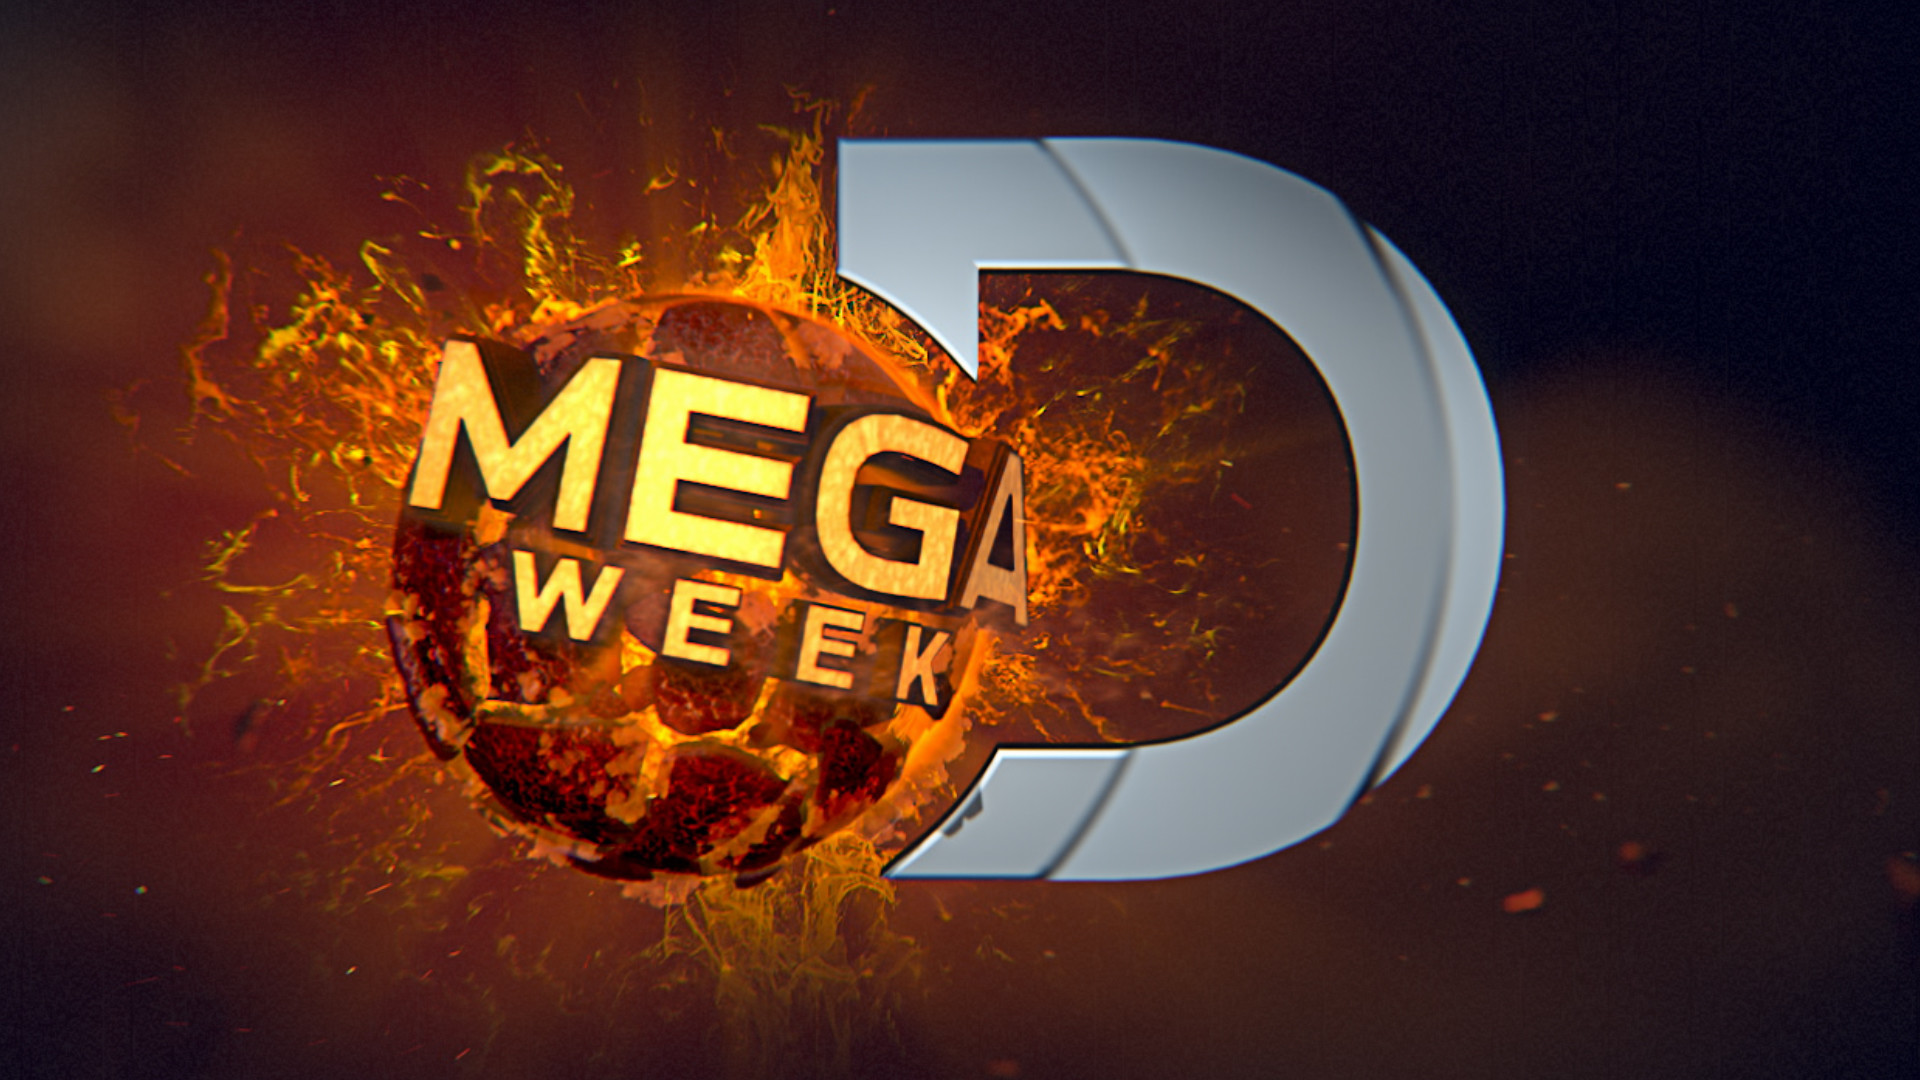 1920x1080 Go Big or Go Home with Discovery's Mega Week